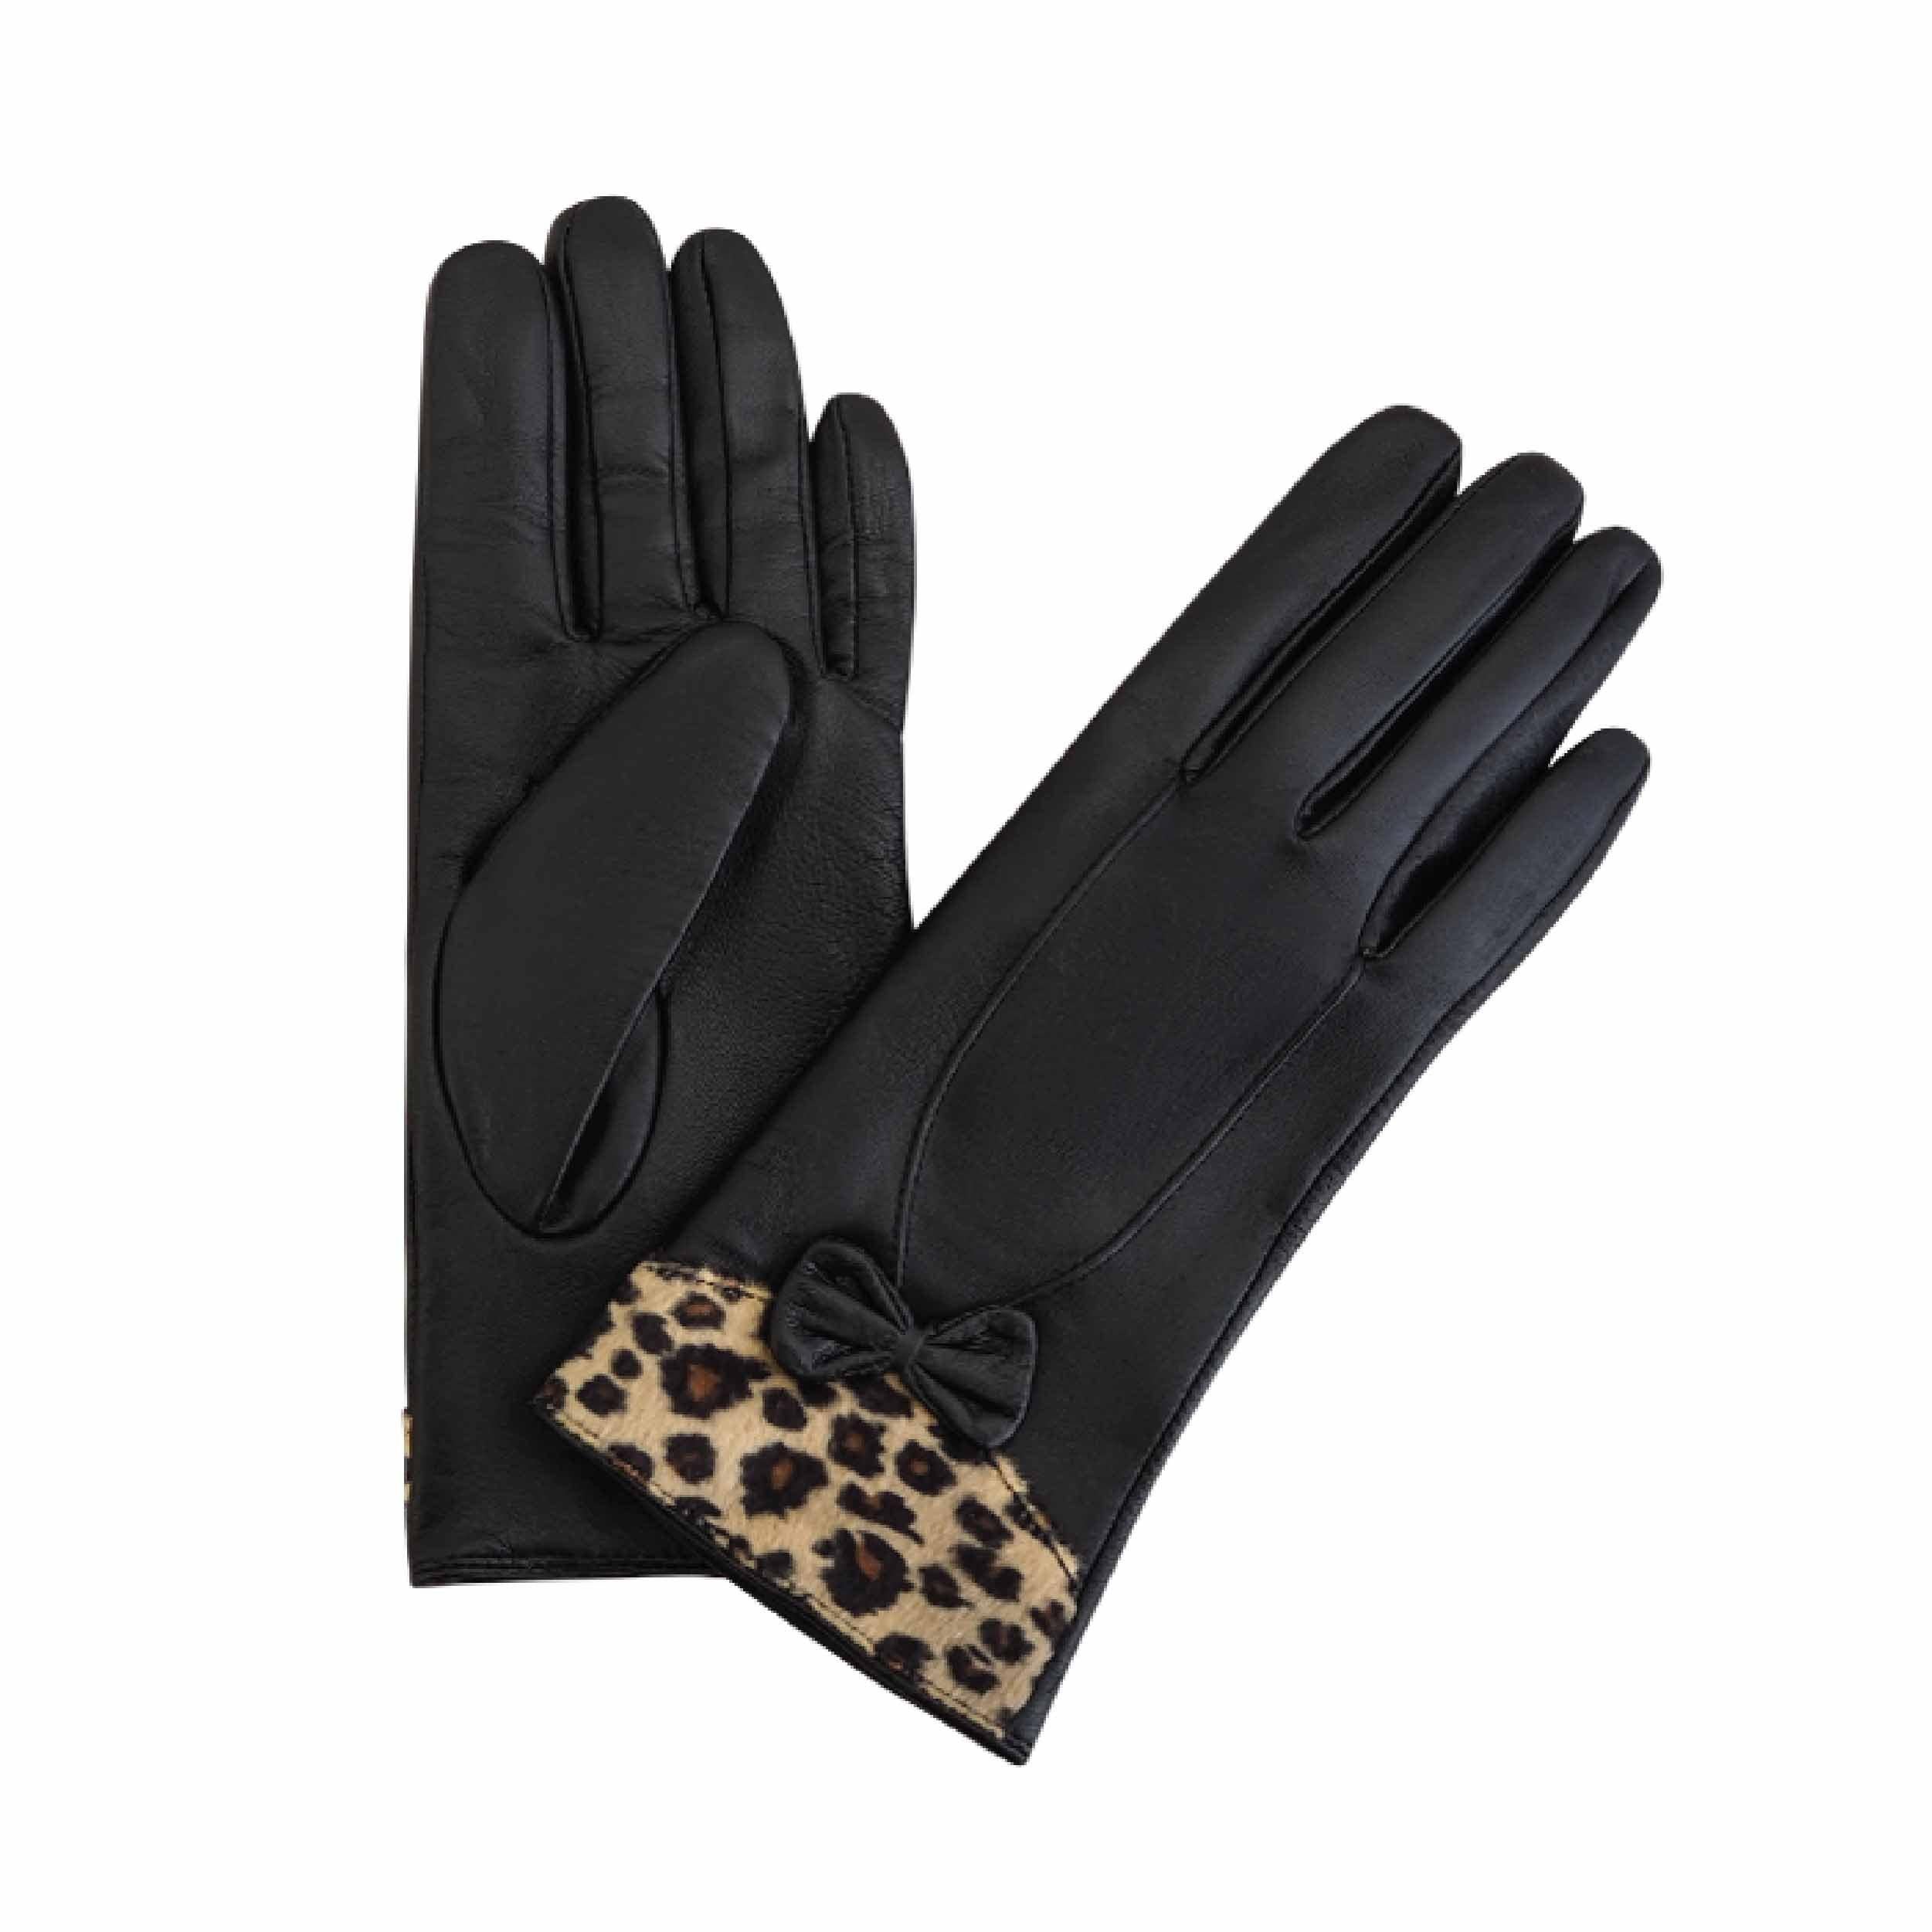 Leather Gloves Animal Print Bow Glove Black Picture 1 regular from Cadelle Leather